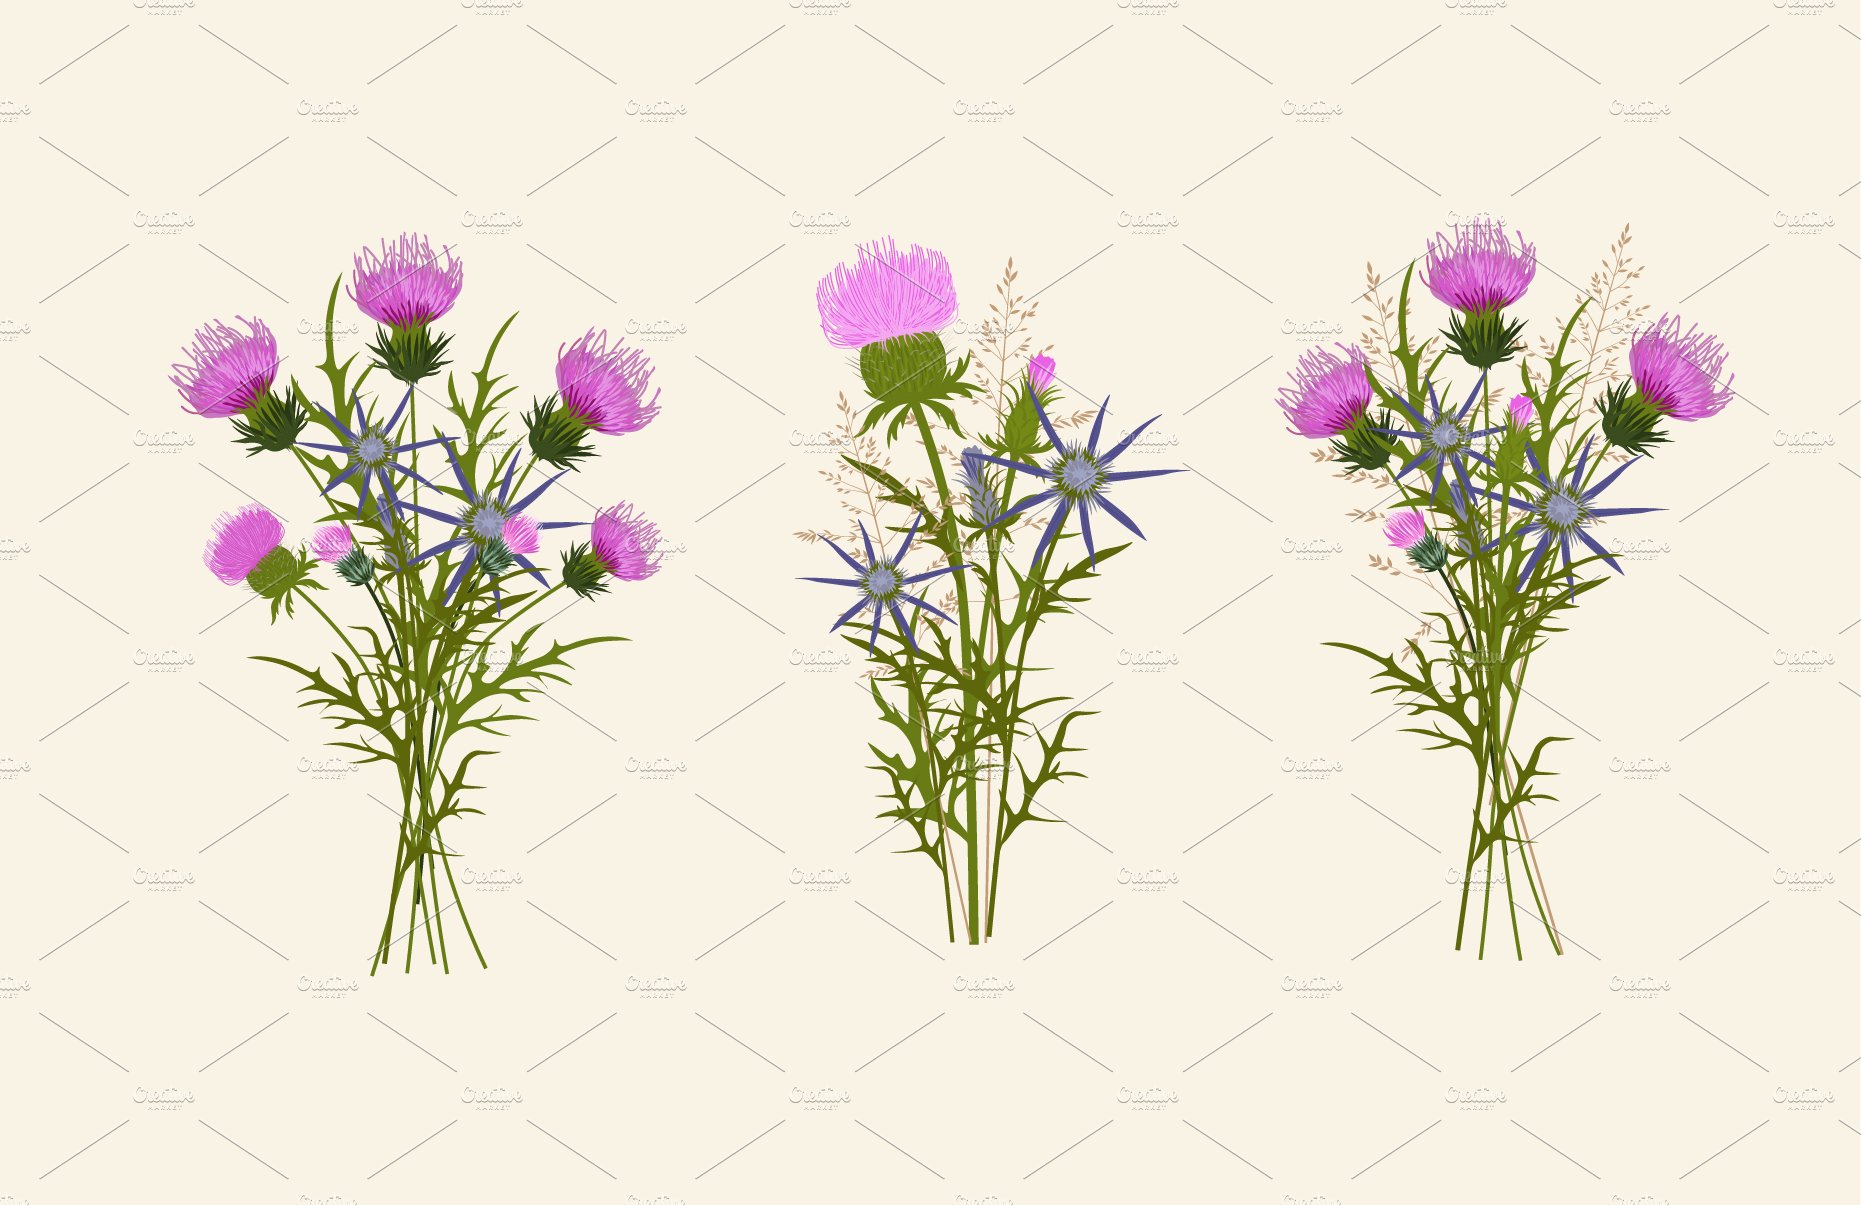 Thistle - meadow flower preview image.